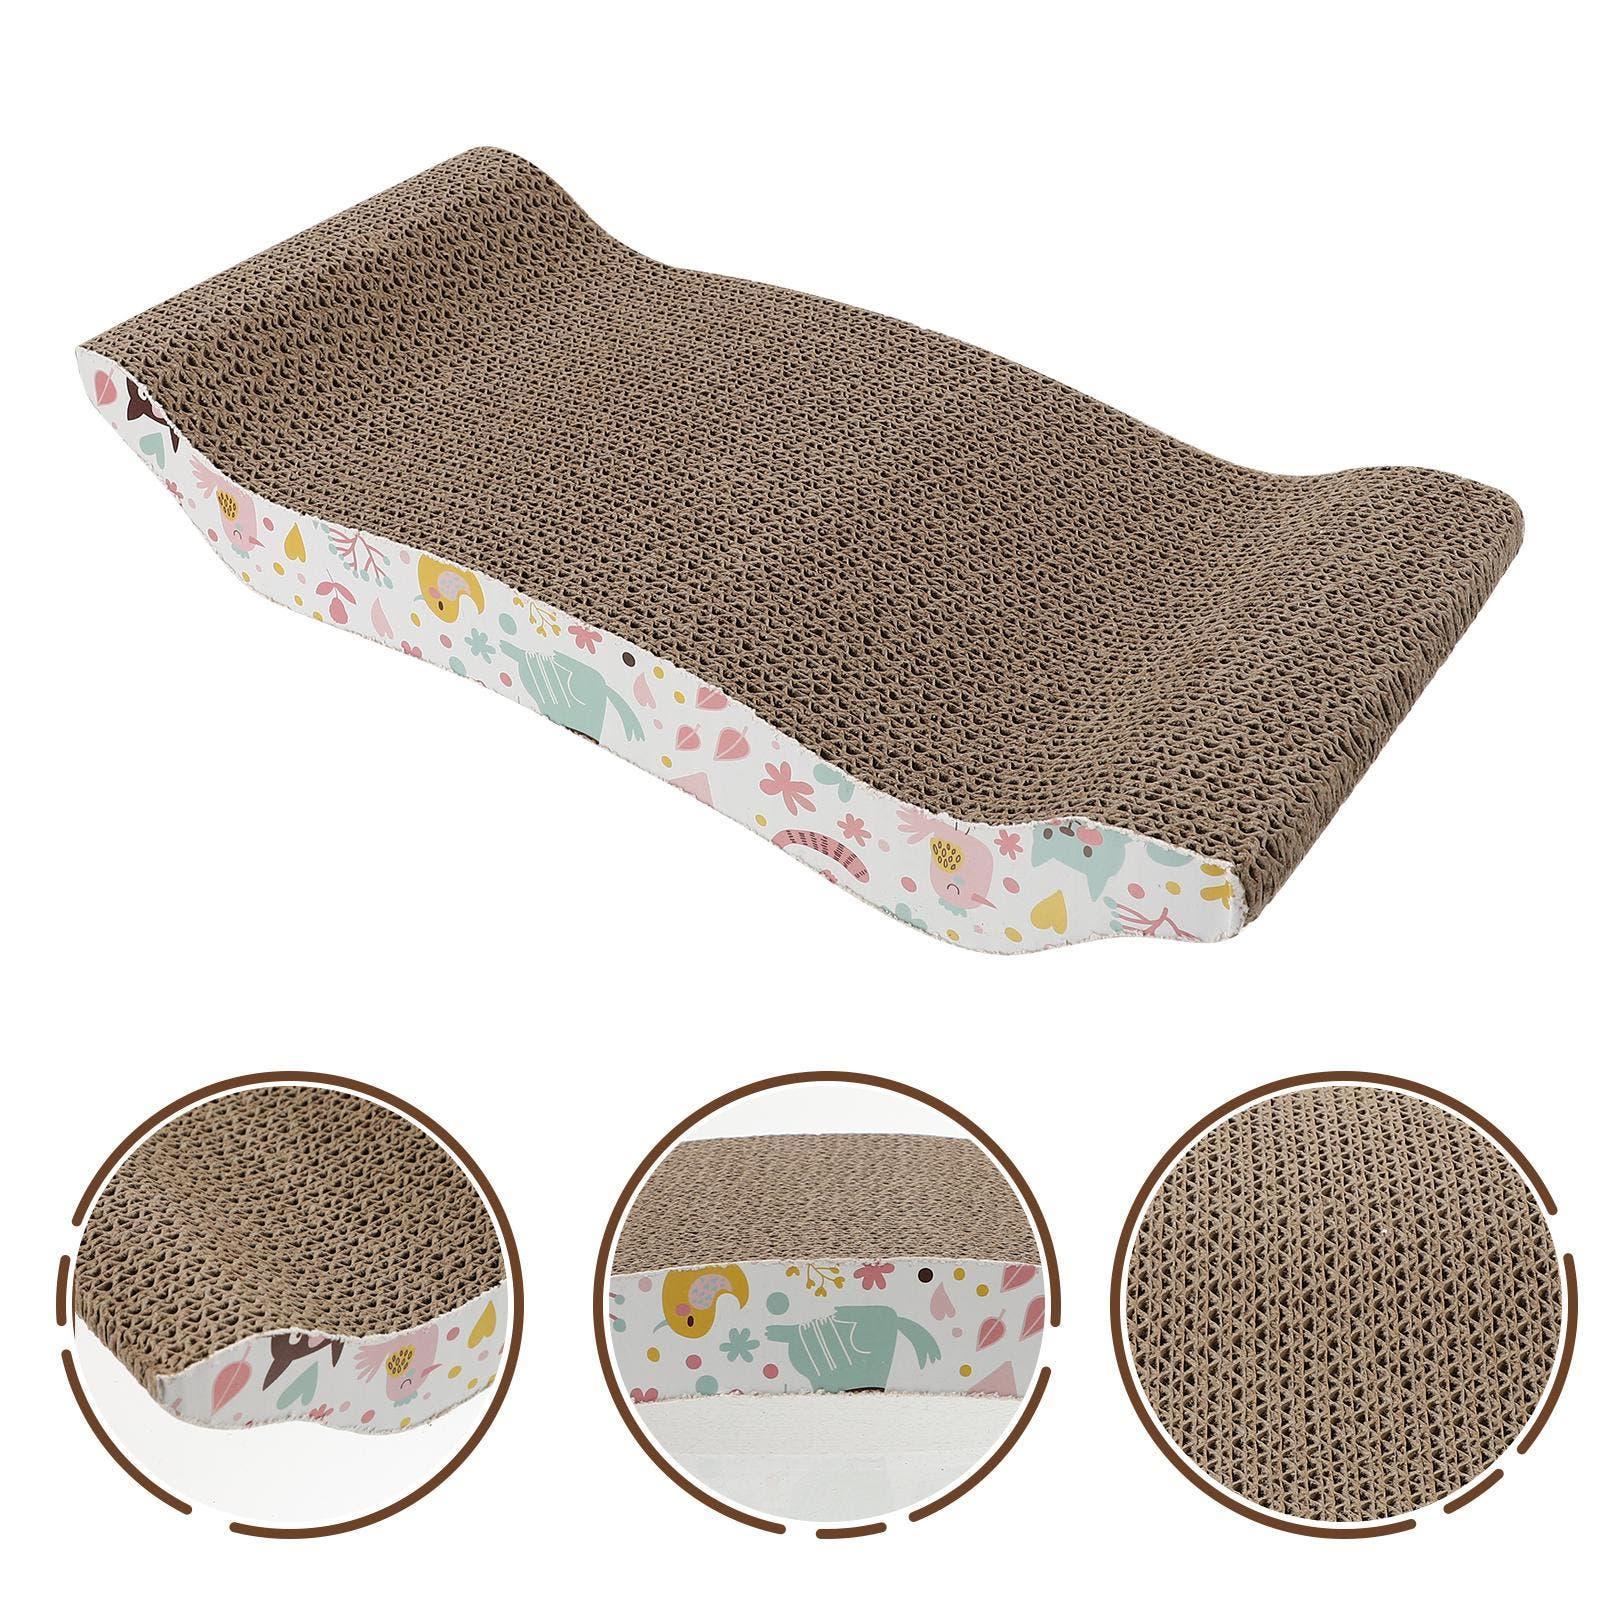 1pc Lovely Wear-resistant Durable Pet Scratcher Cat Scratching Board Pet Grinding Toy